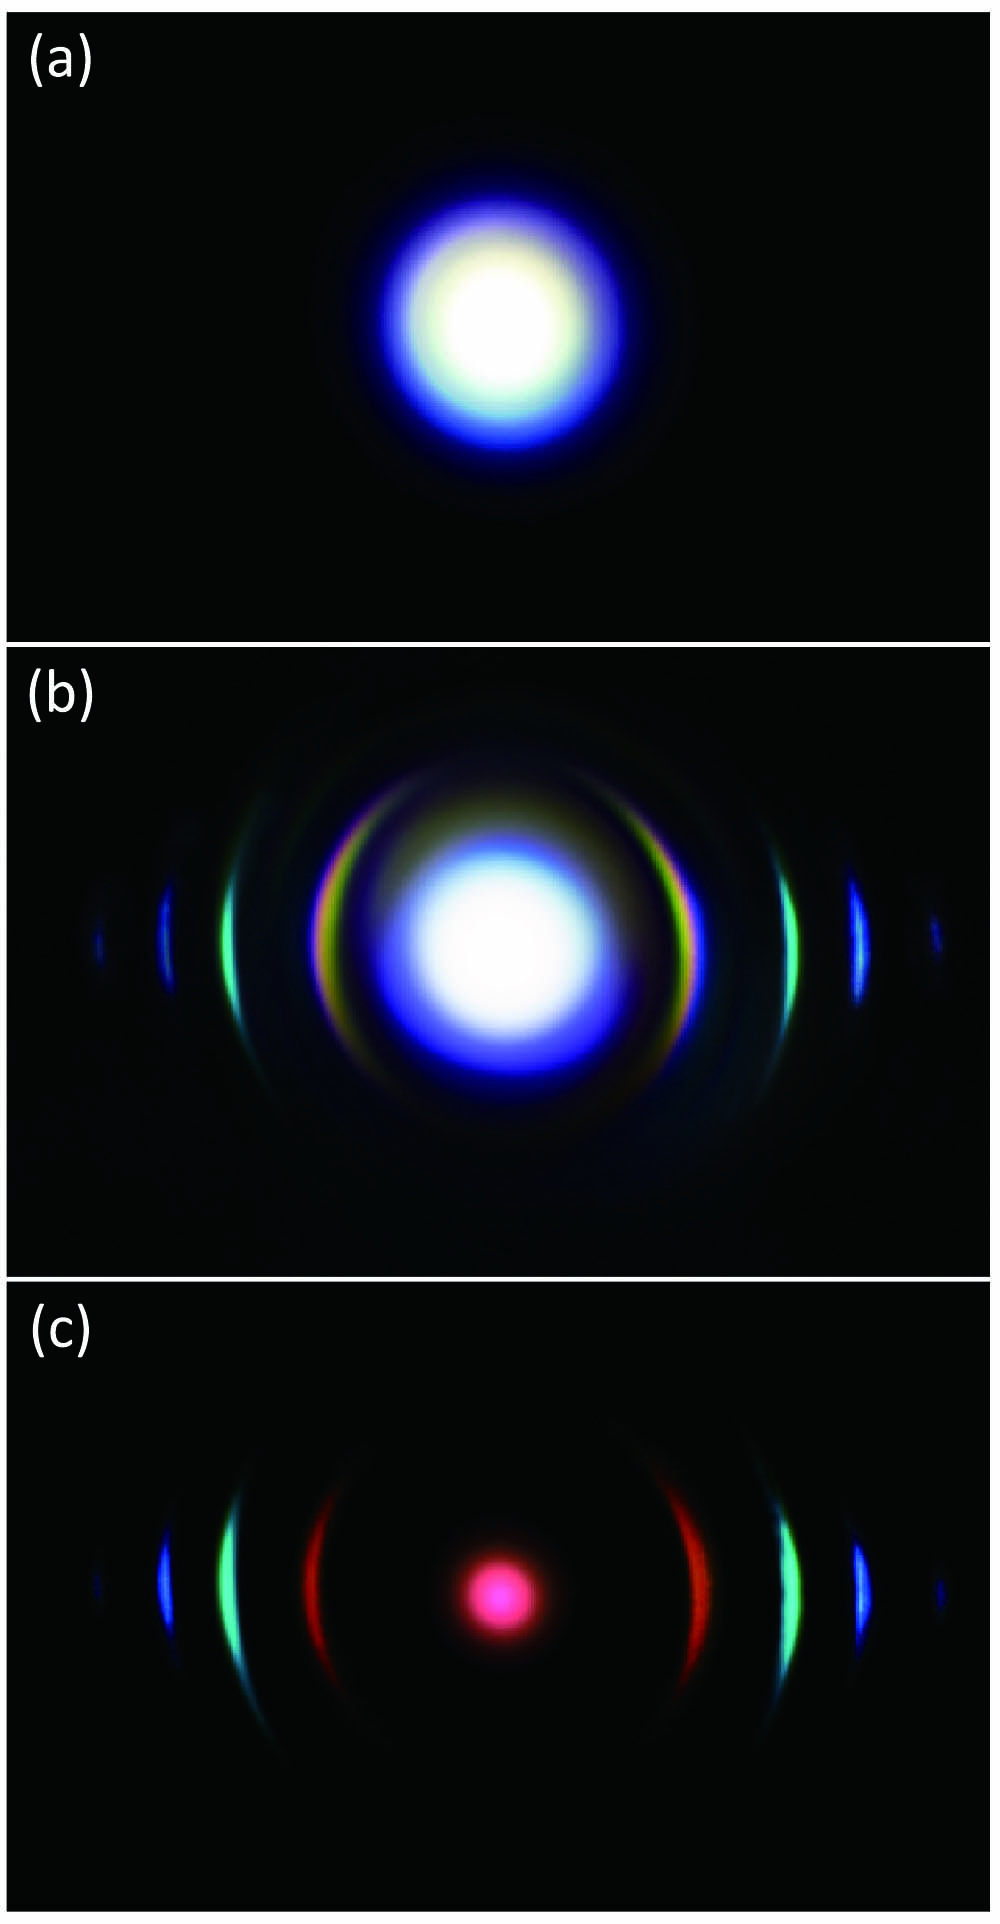 Emission patterns at the output of the crystal, recorded (a) at the very beginning of the experiment and after (b) 1 h and (c) 2.4 h of exposure time.